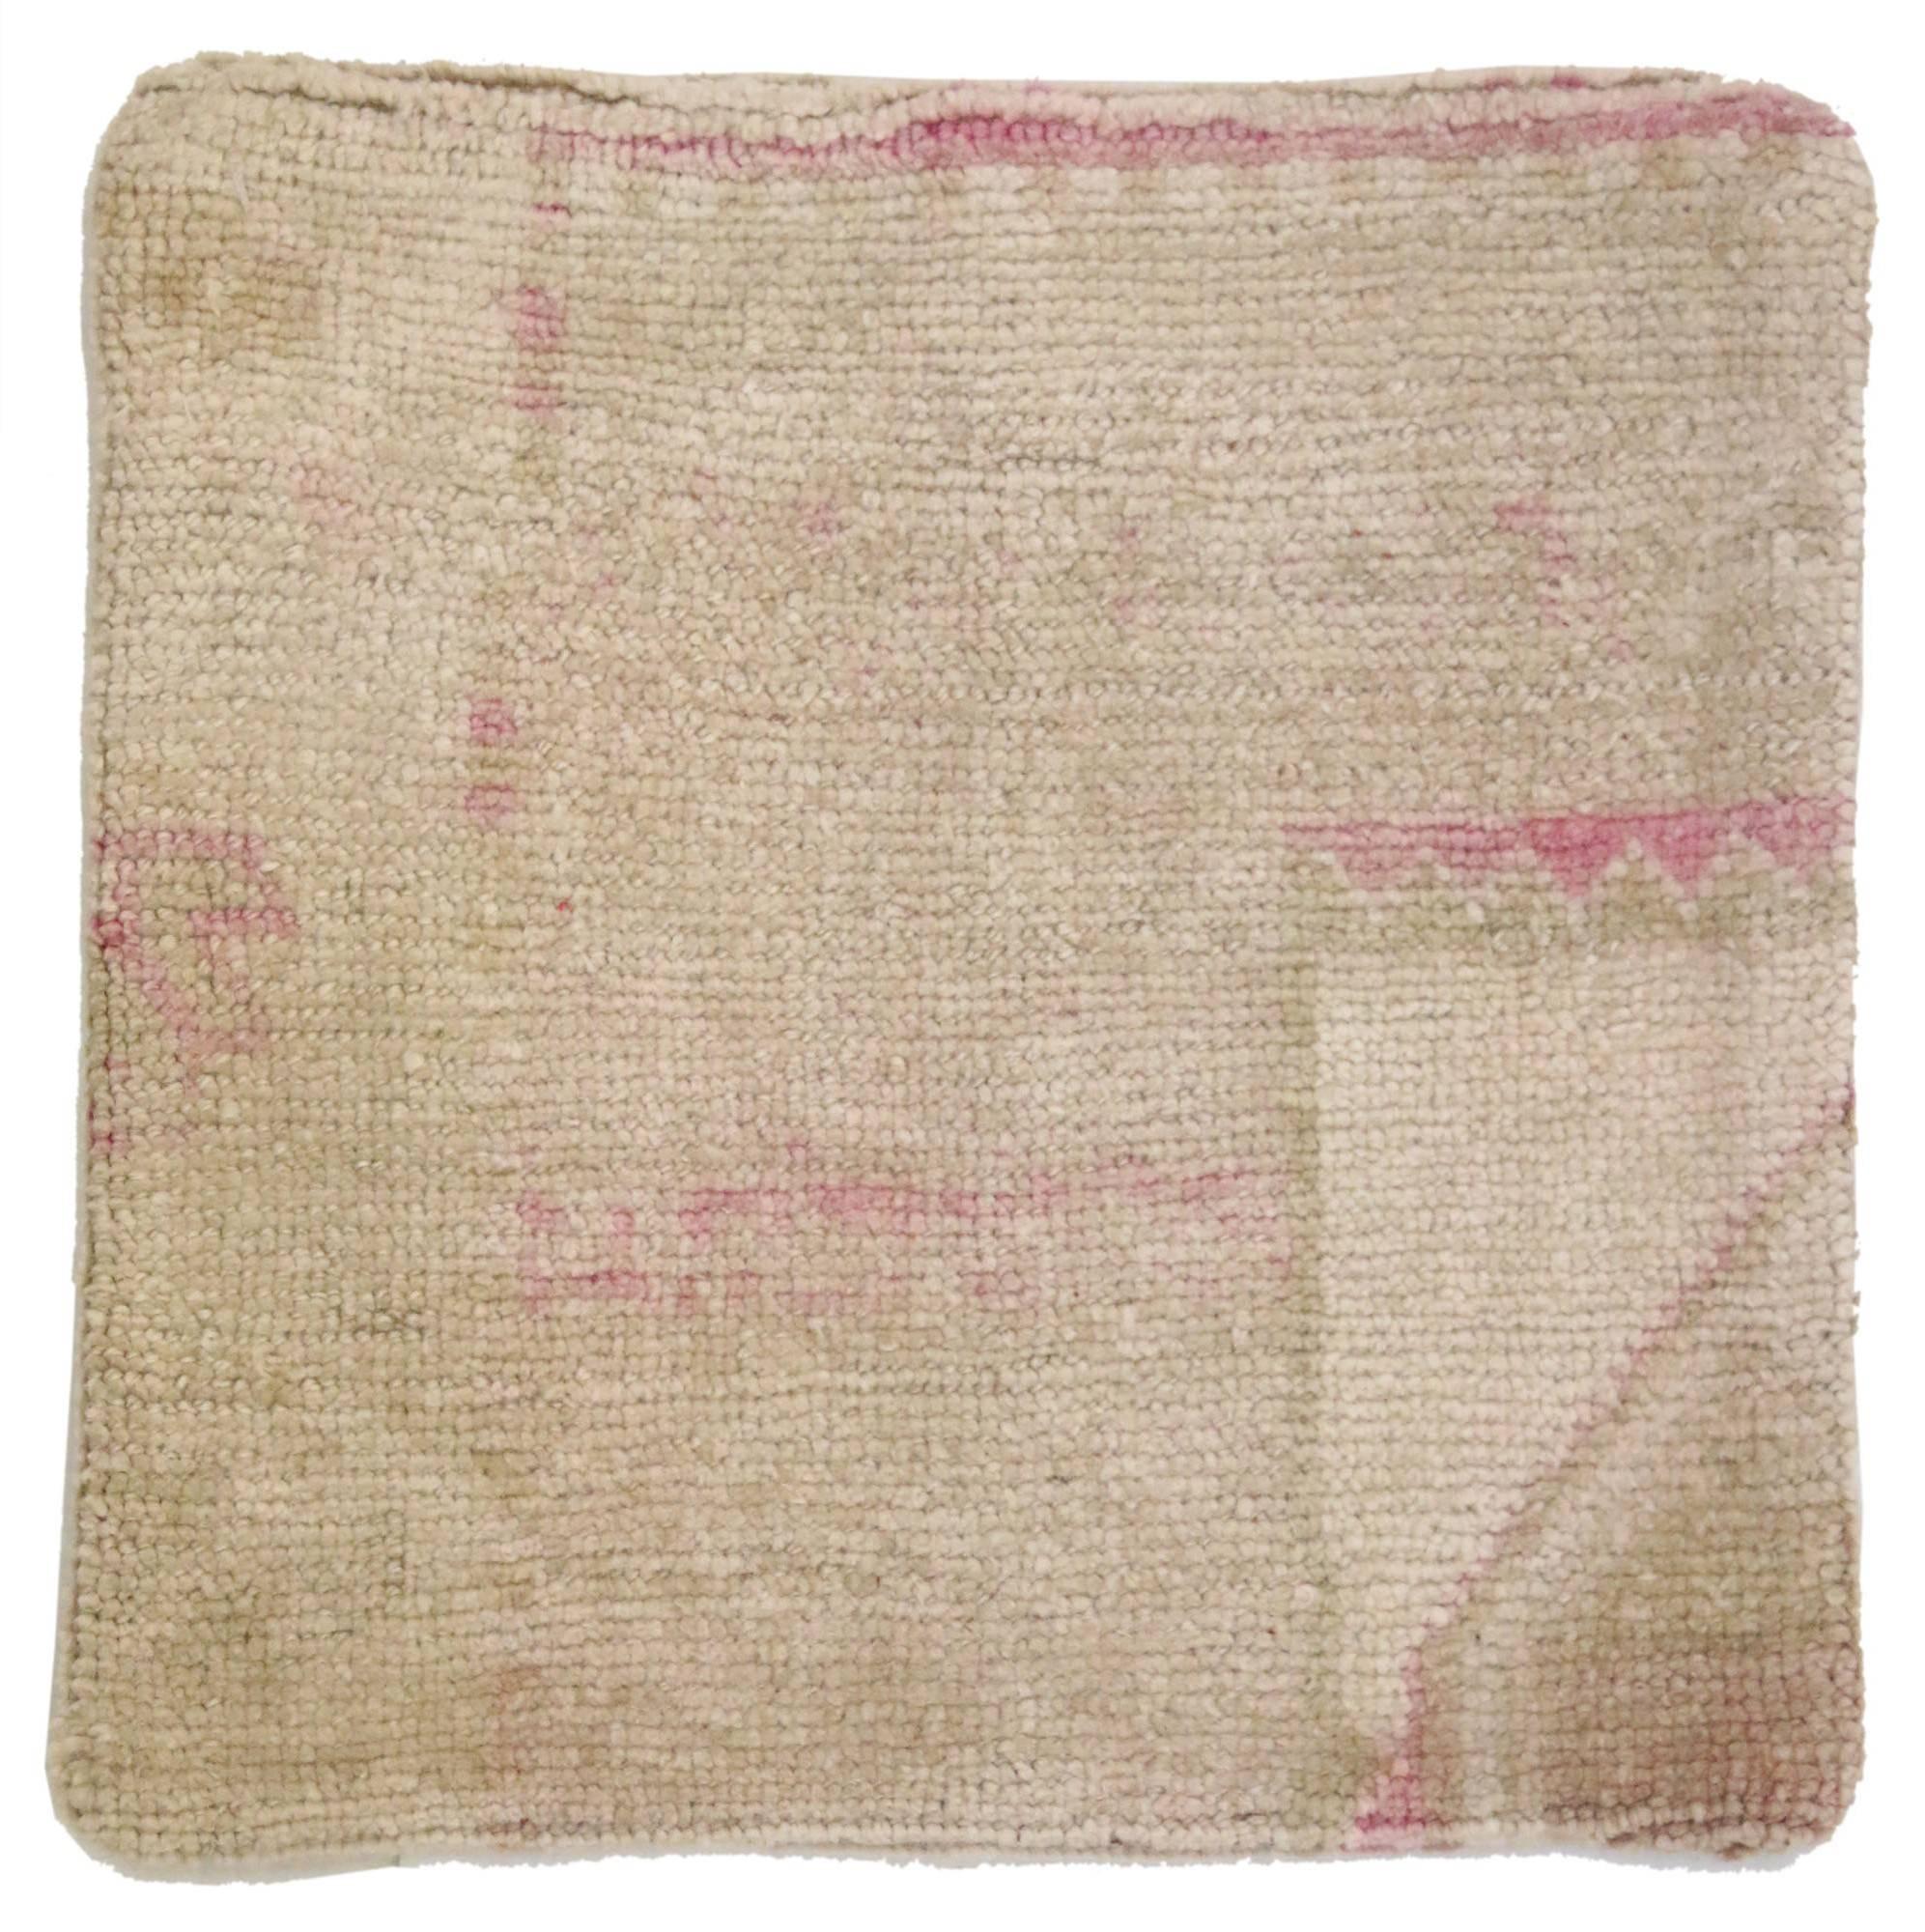 Vintage Oushak Pillow Cover with Soft Muted Colors, Oushak Rug Pillow Cover